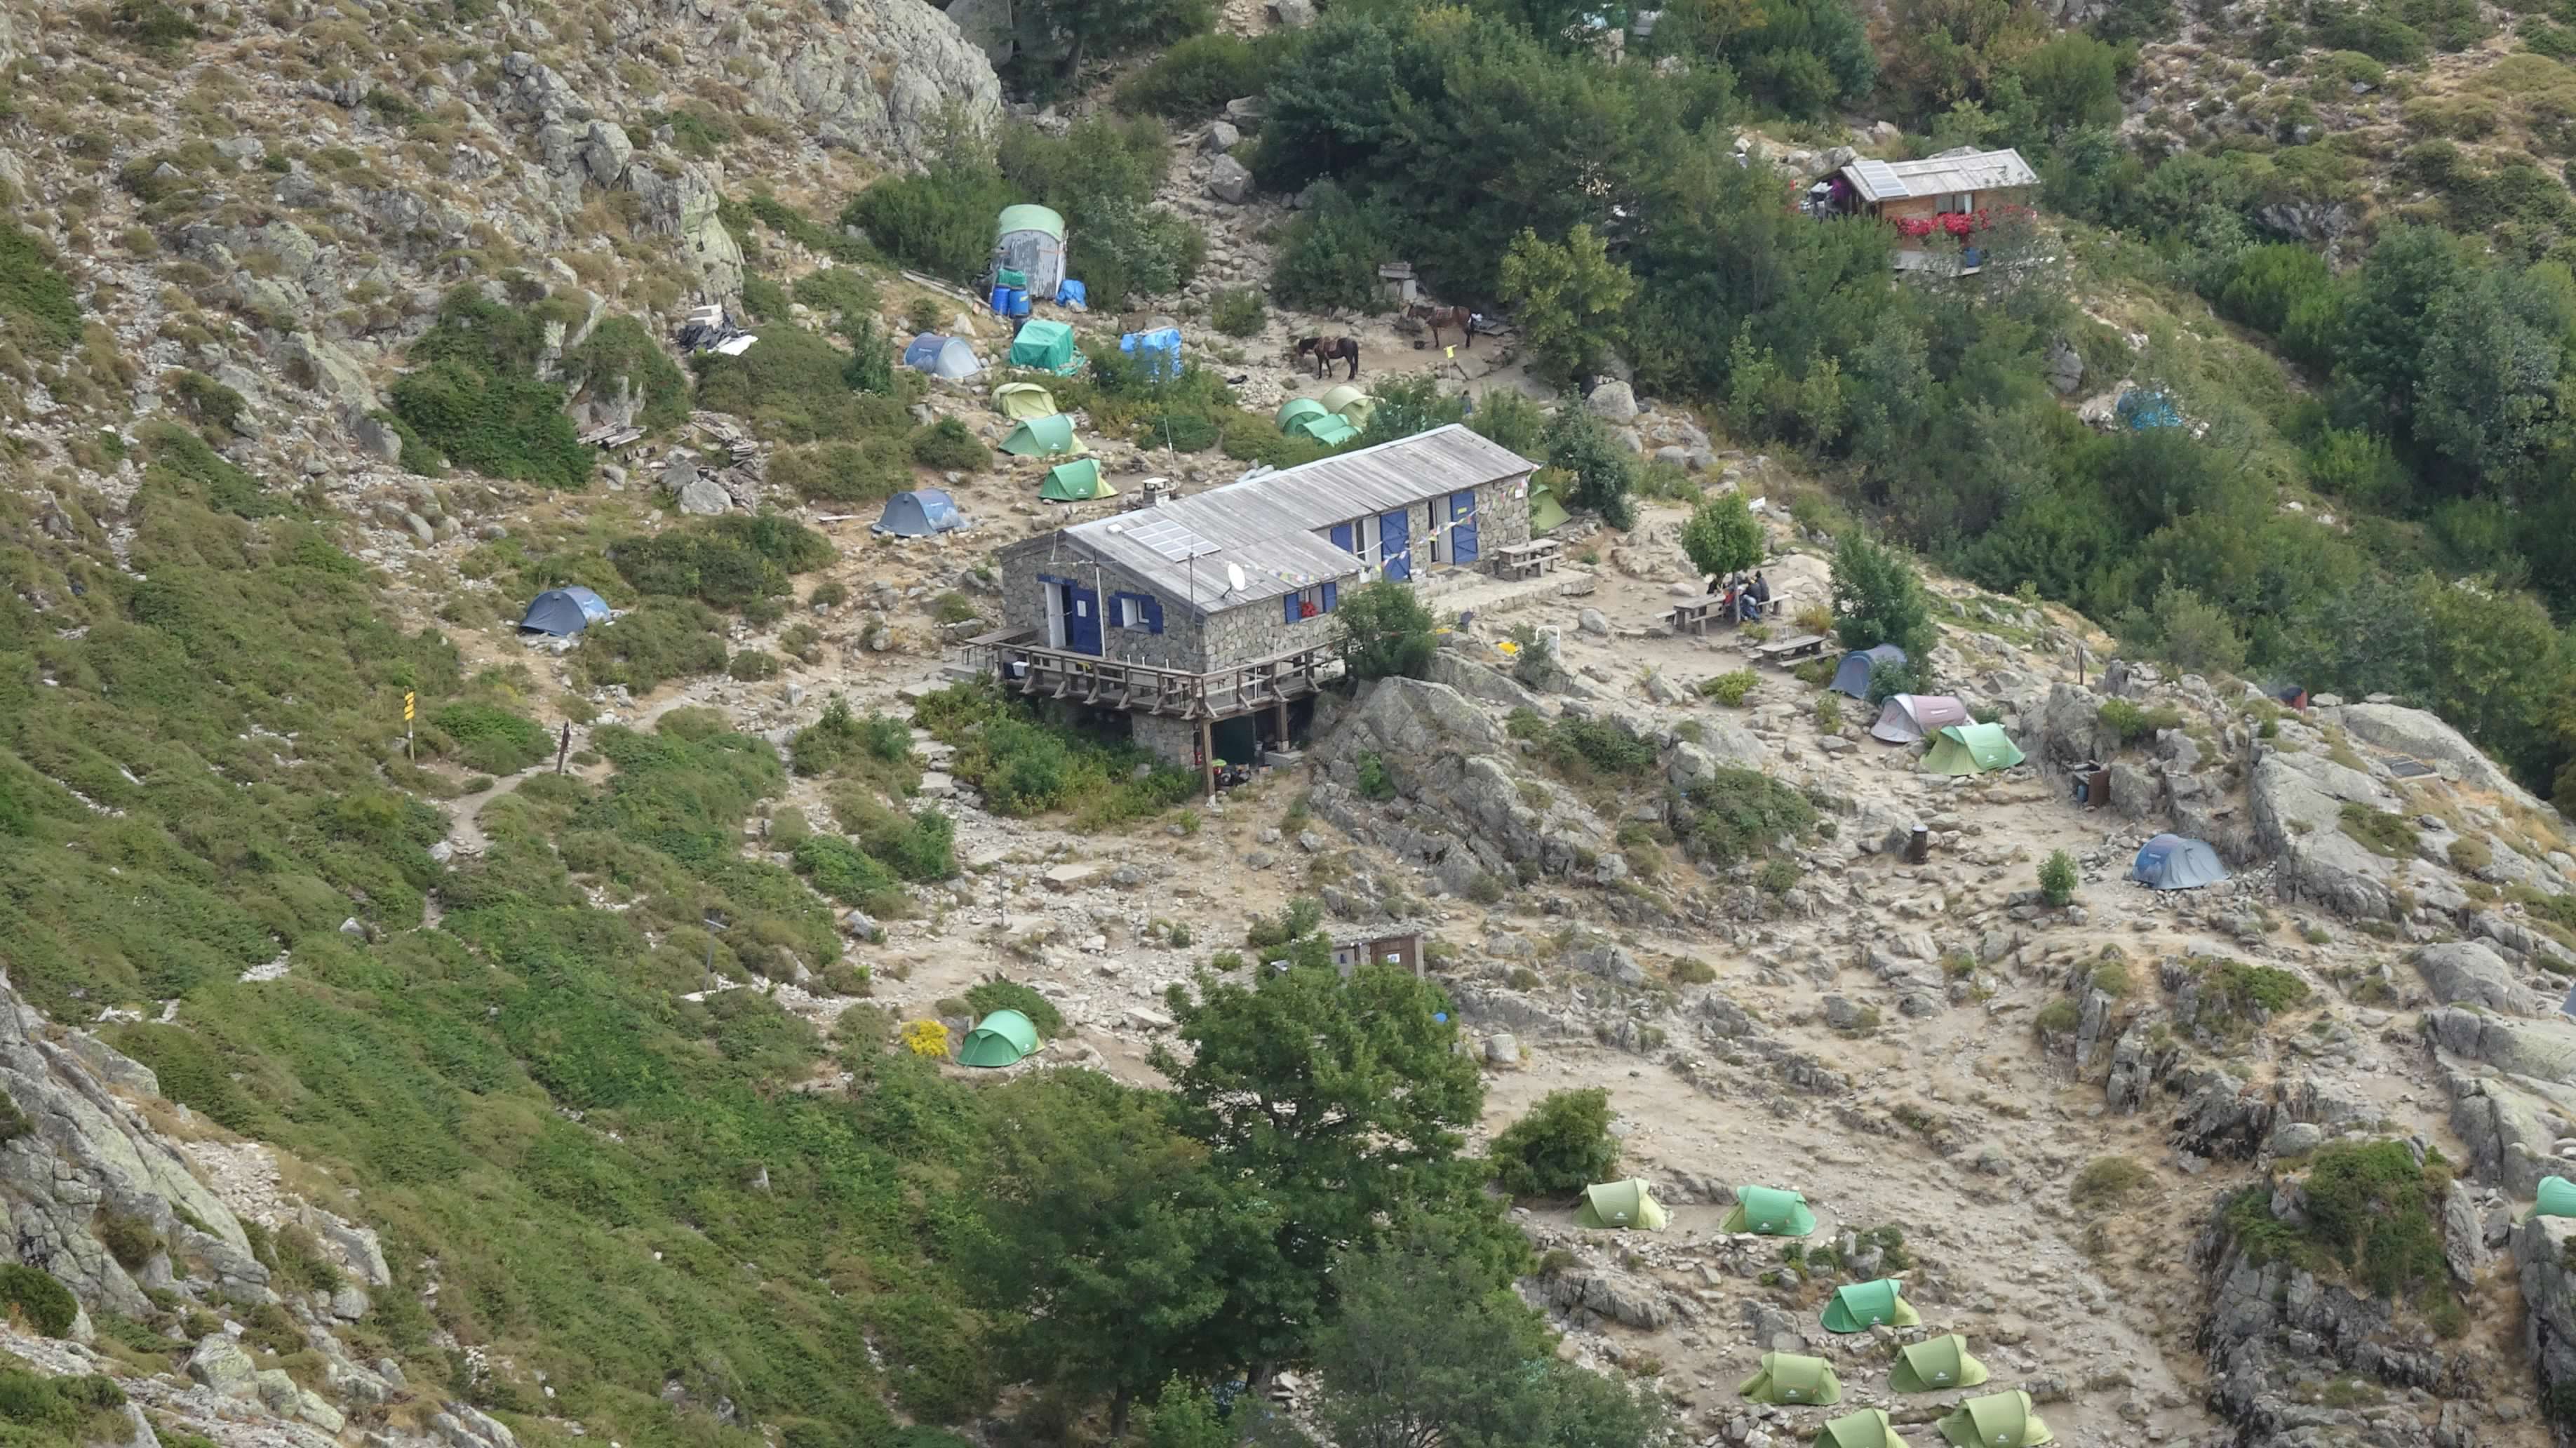 One of the many refuges along the GR20 with additional accommodations available in the surrounding tents.